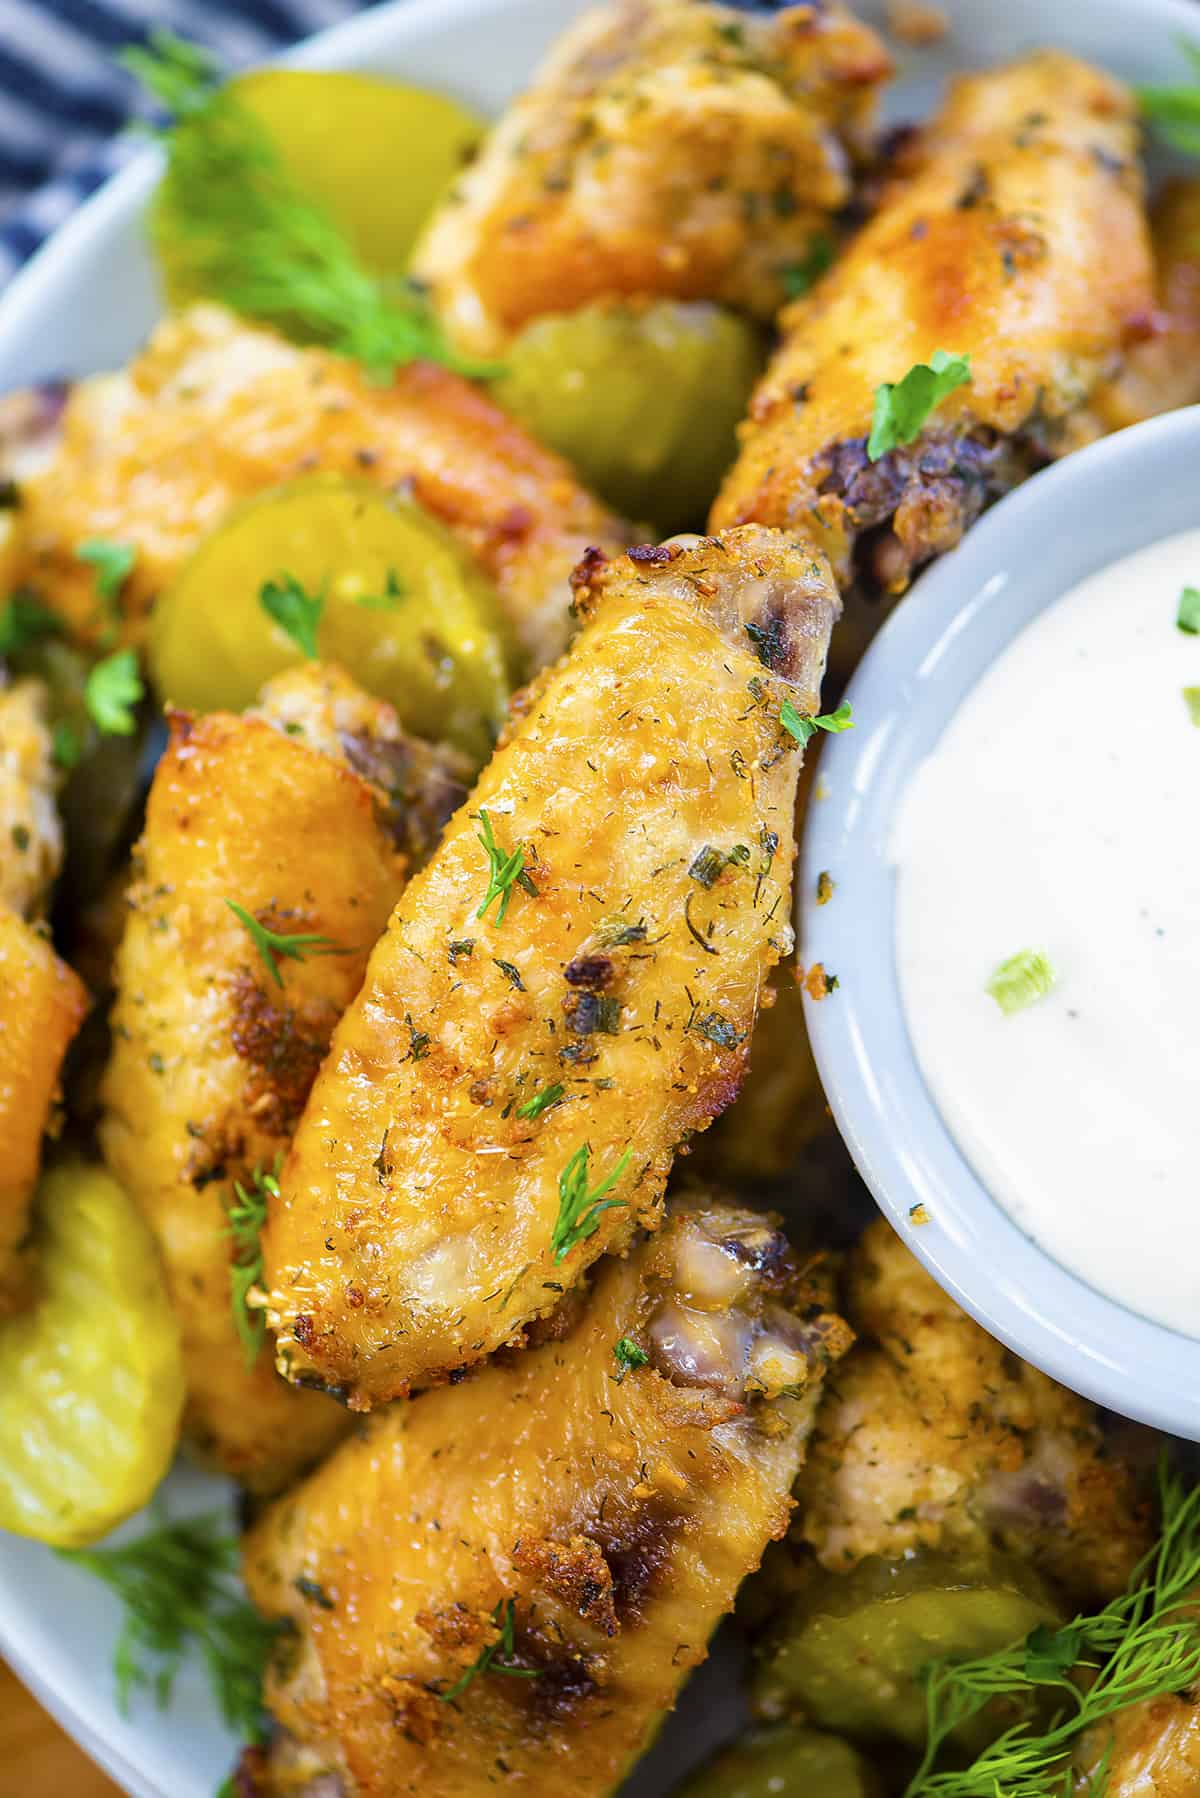 Baked ranch wings in bowl with pickles and ranch dressing.